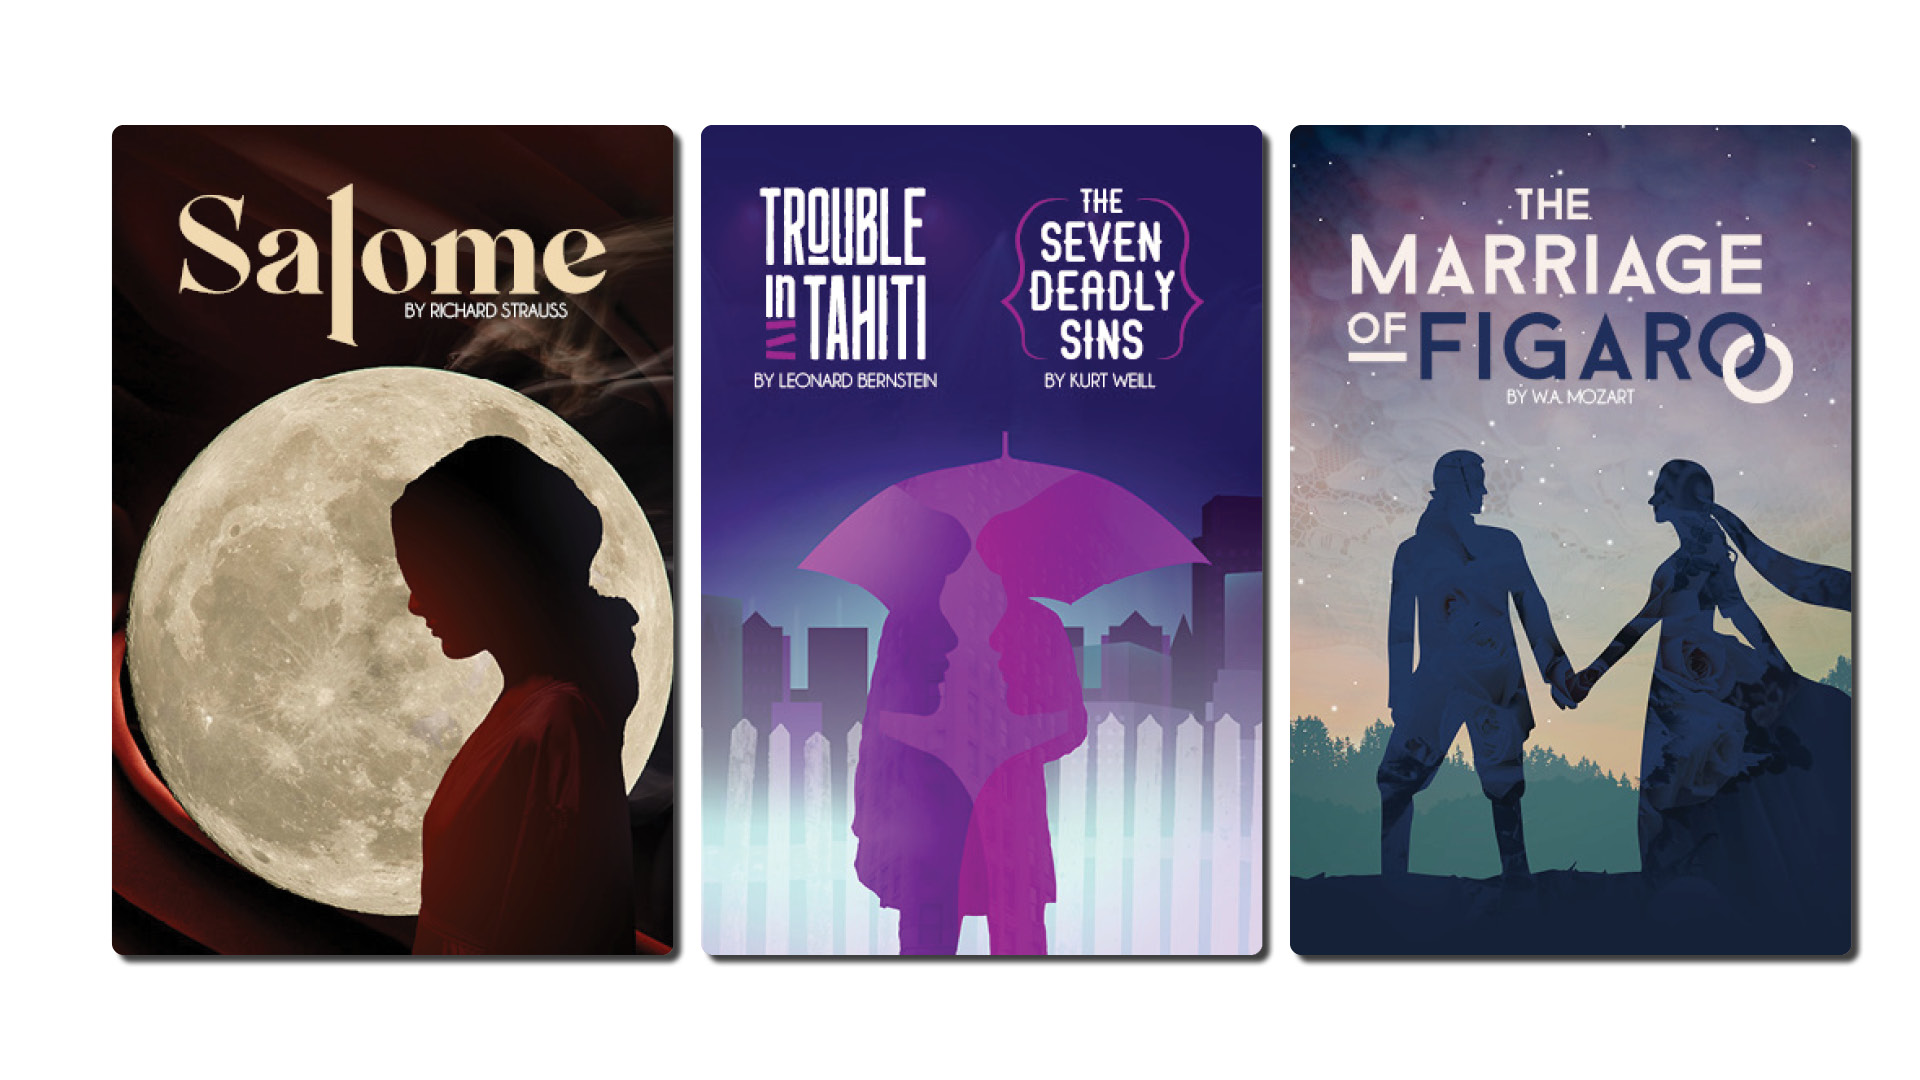 Posters for Salome, Trouble in Tahiti / The Seven Deadly Sins, and The Marriage of Figaro